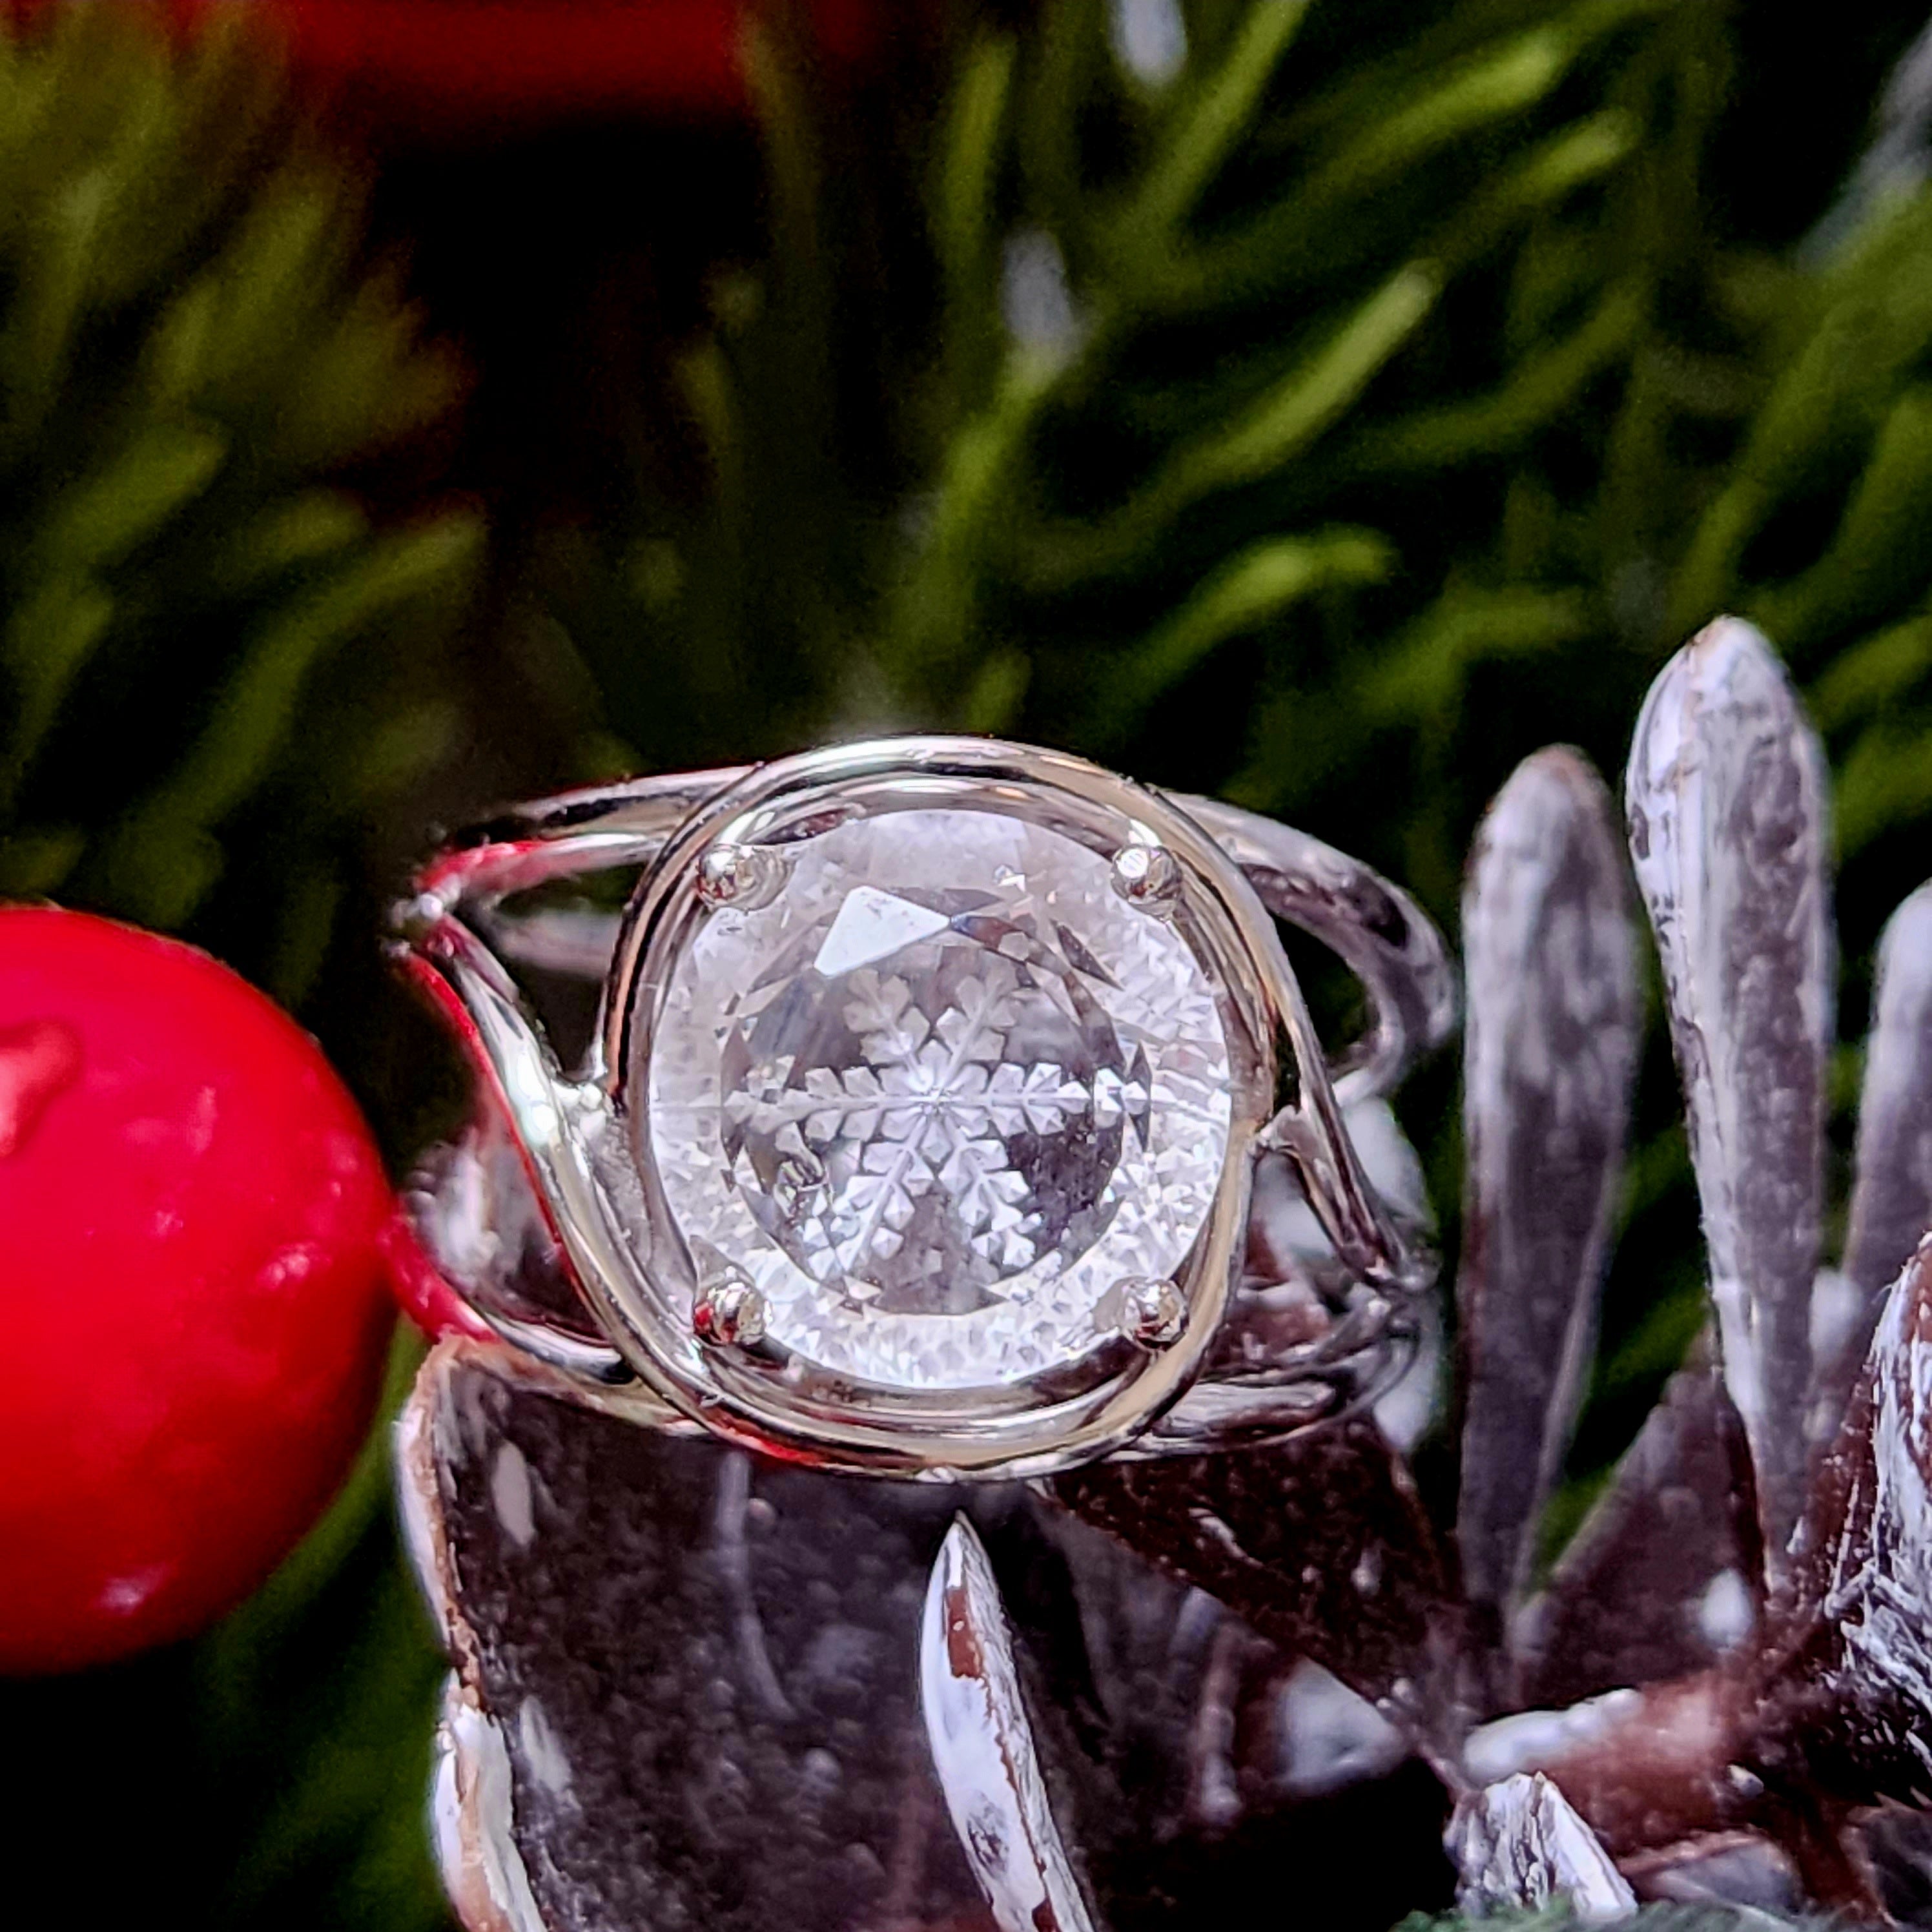 Clear Quartz Snowflake Finger Cuff Adjustable Ring .925 Sterling Silver for Manifesting, Setting Intentions and Healing